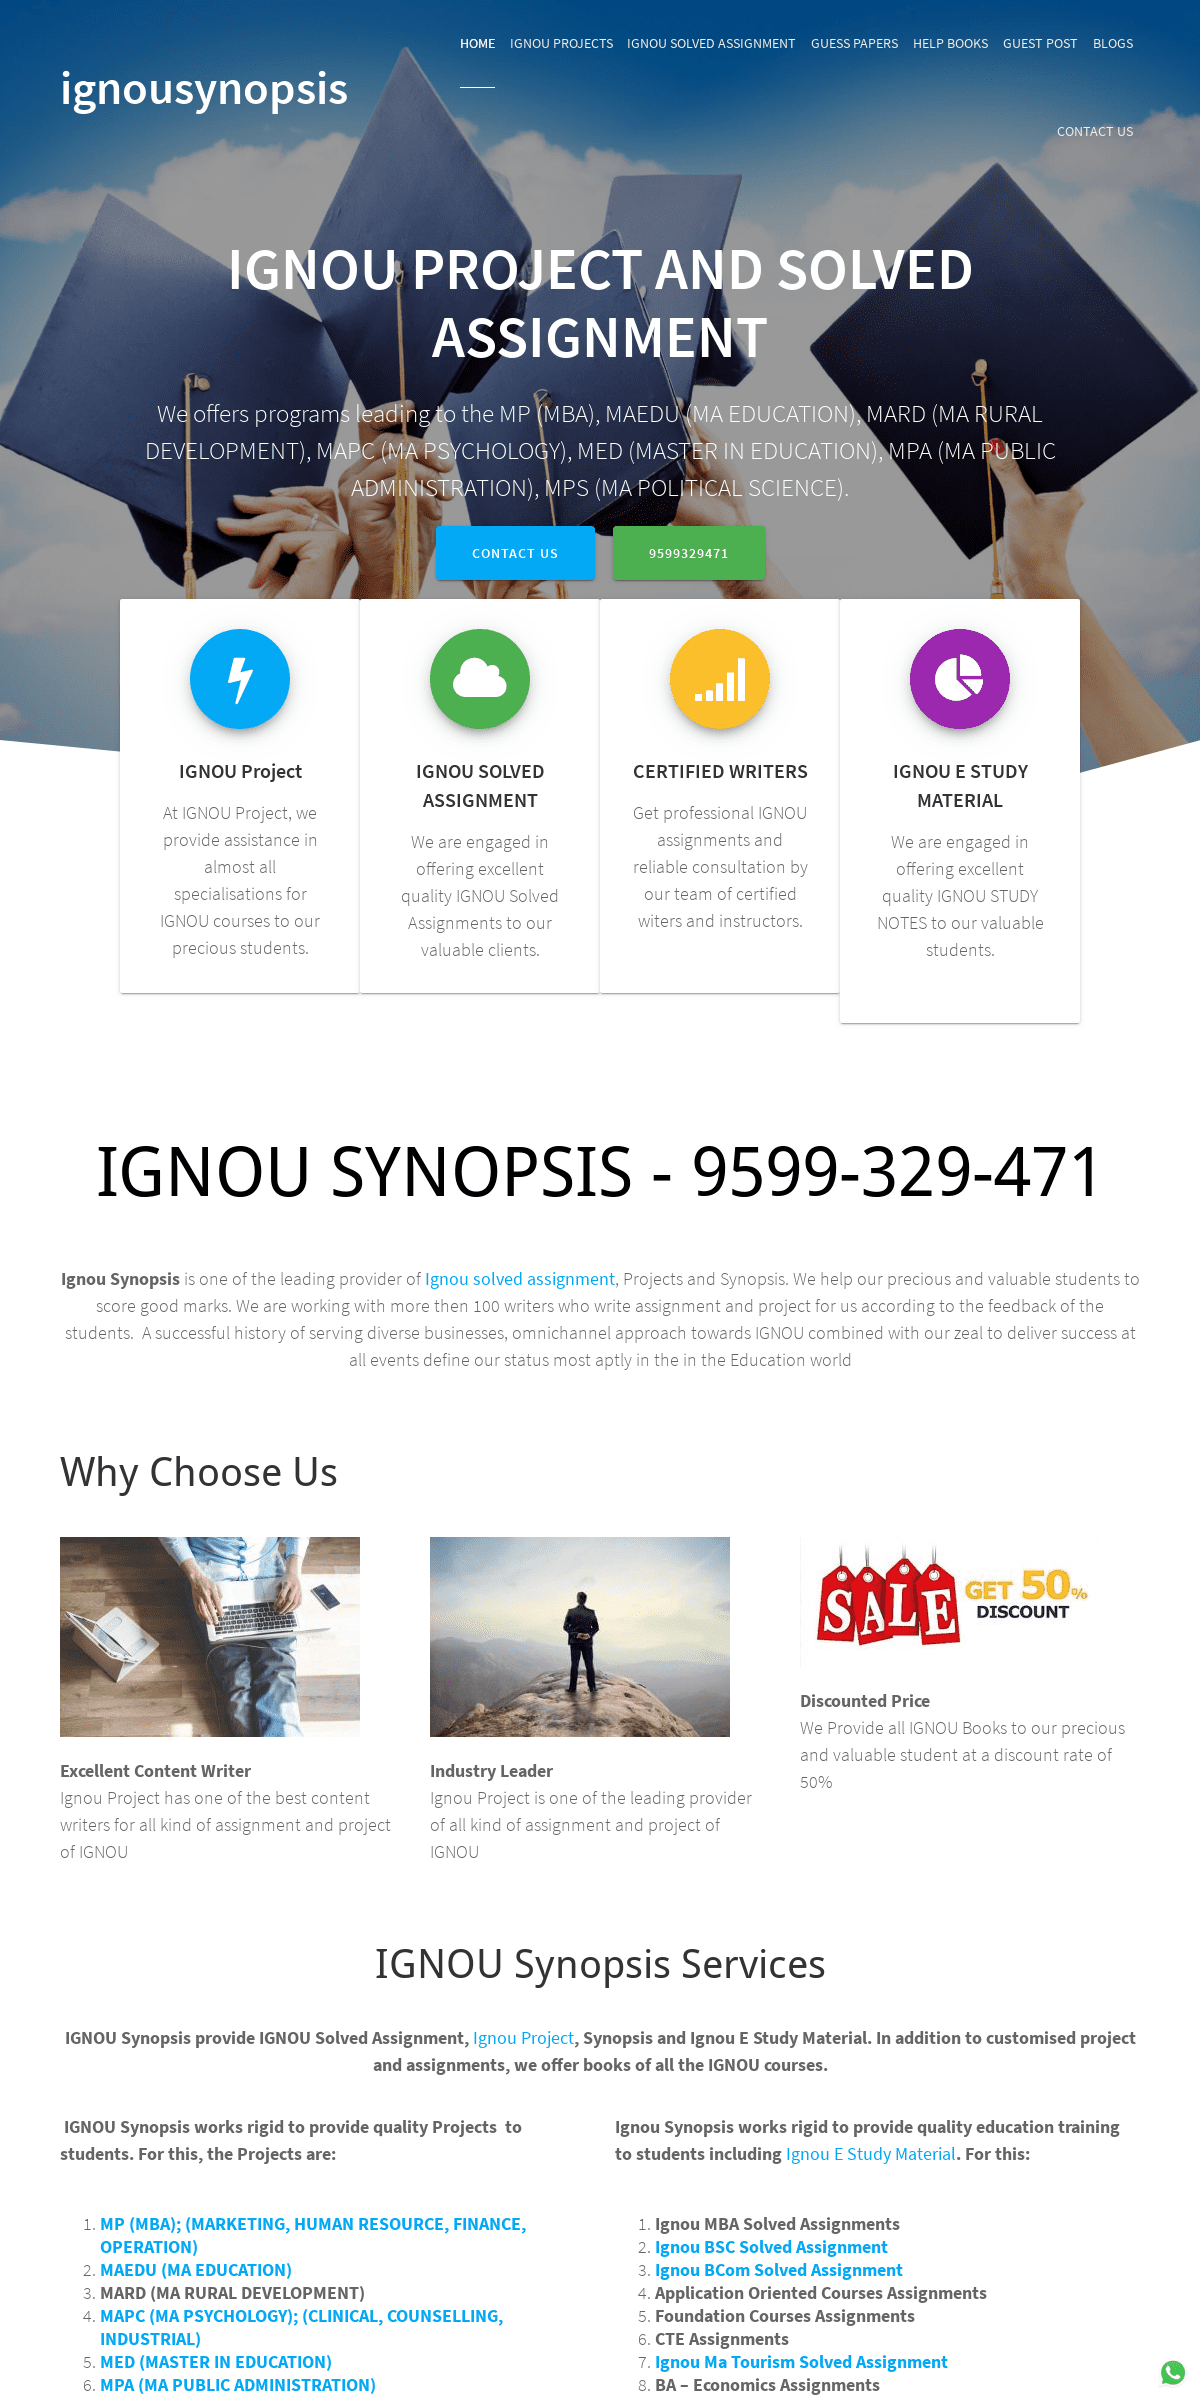 A complete backup of ignousynopsis.com